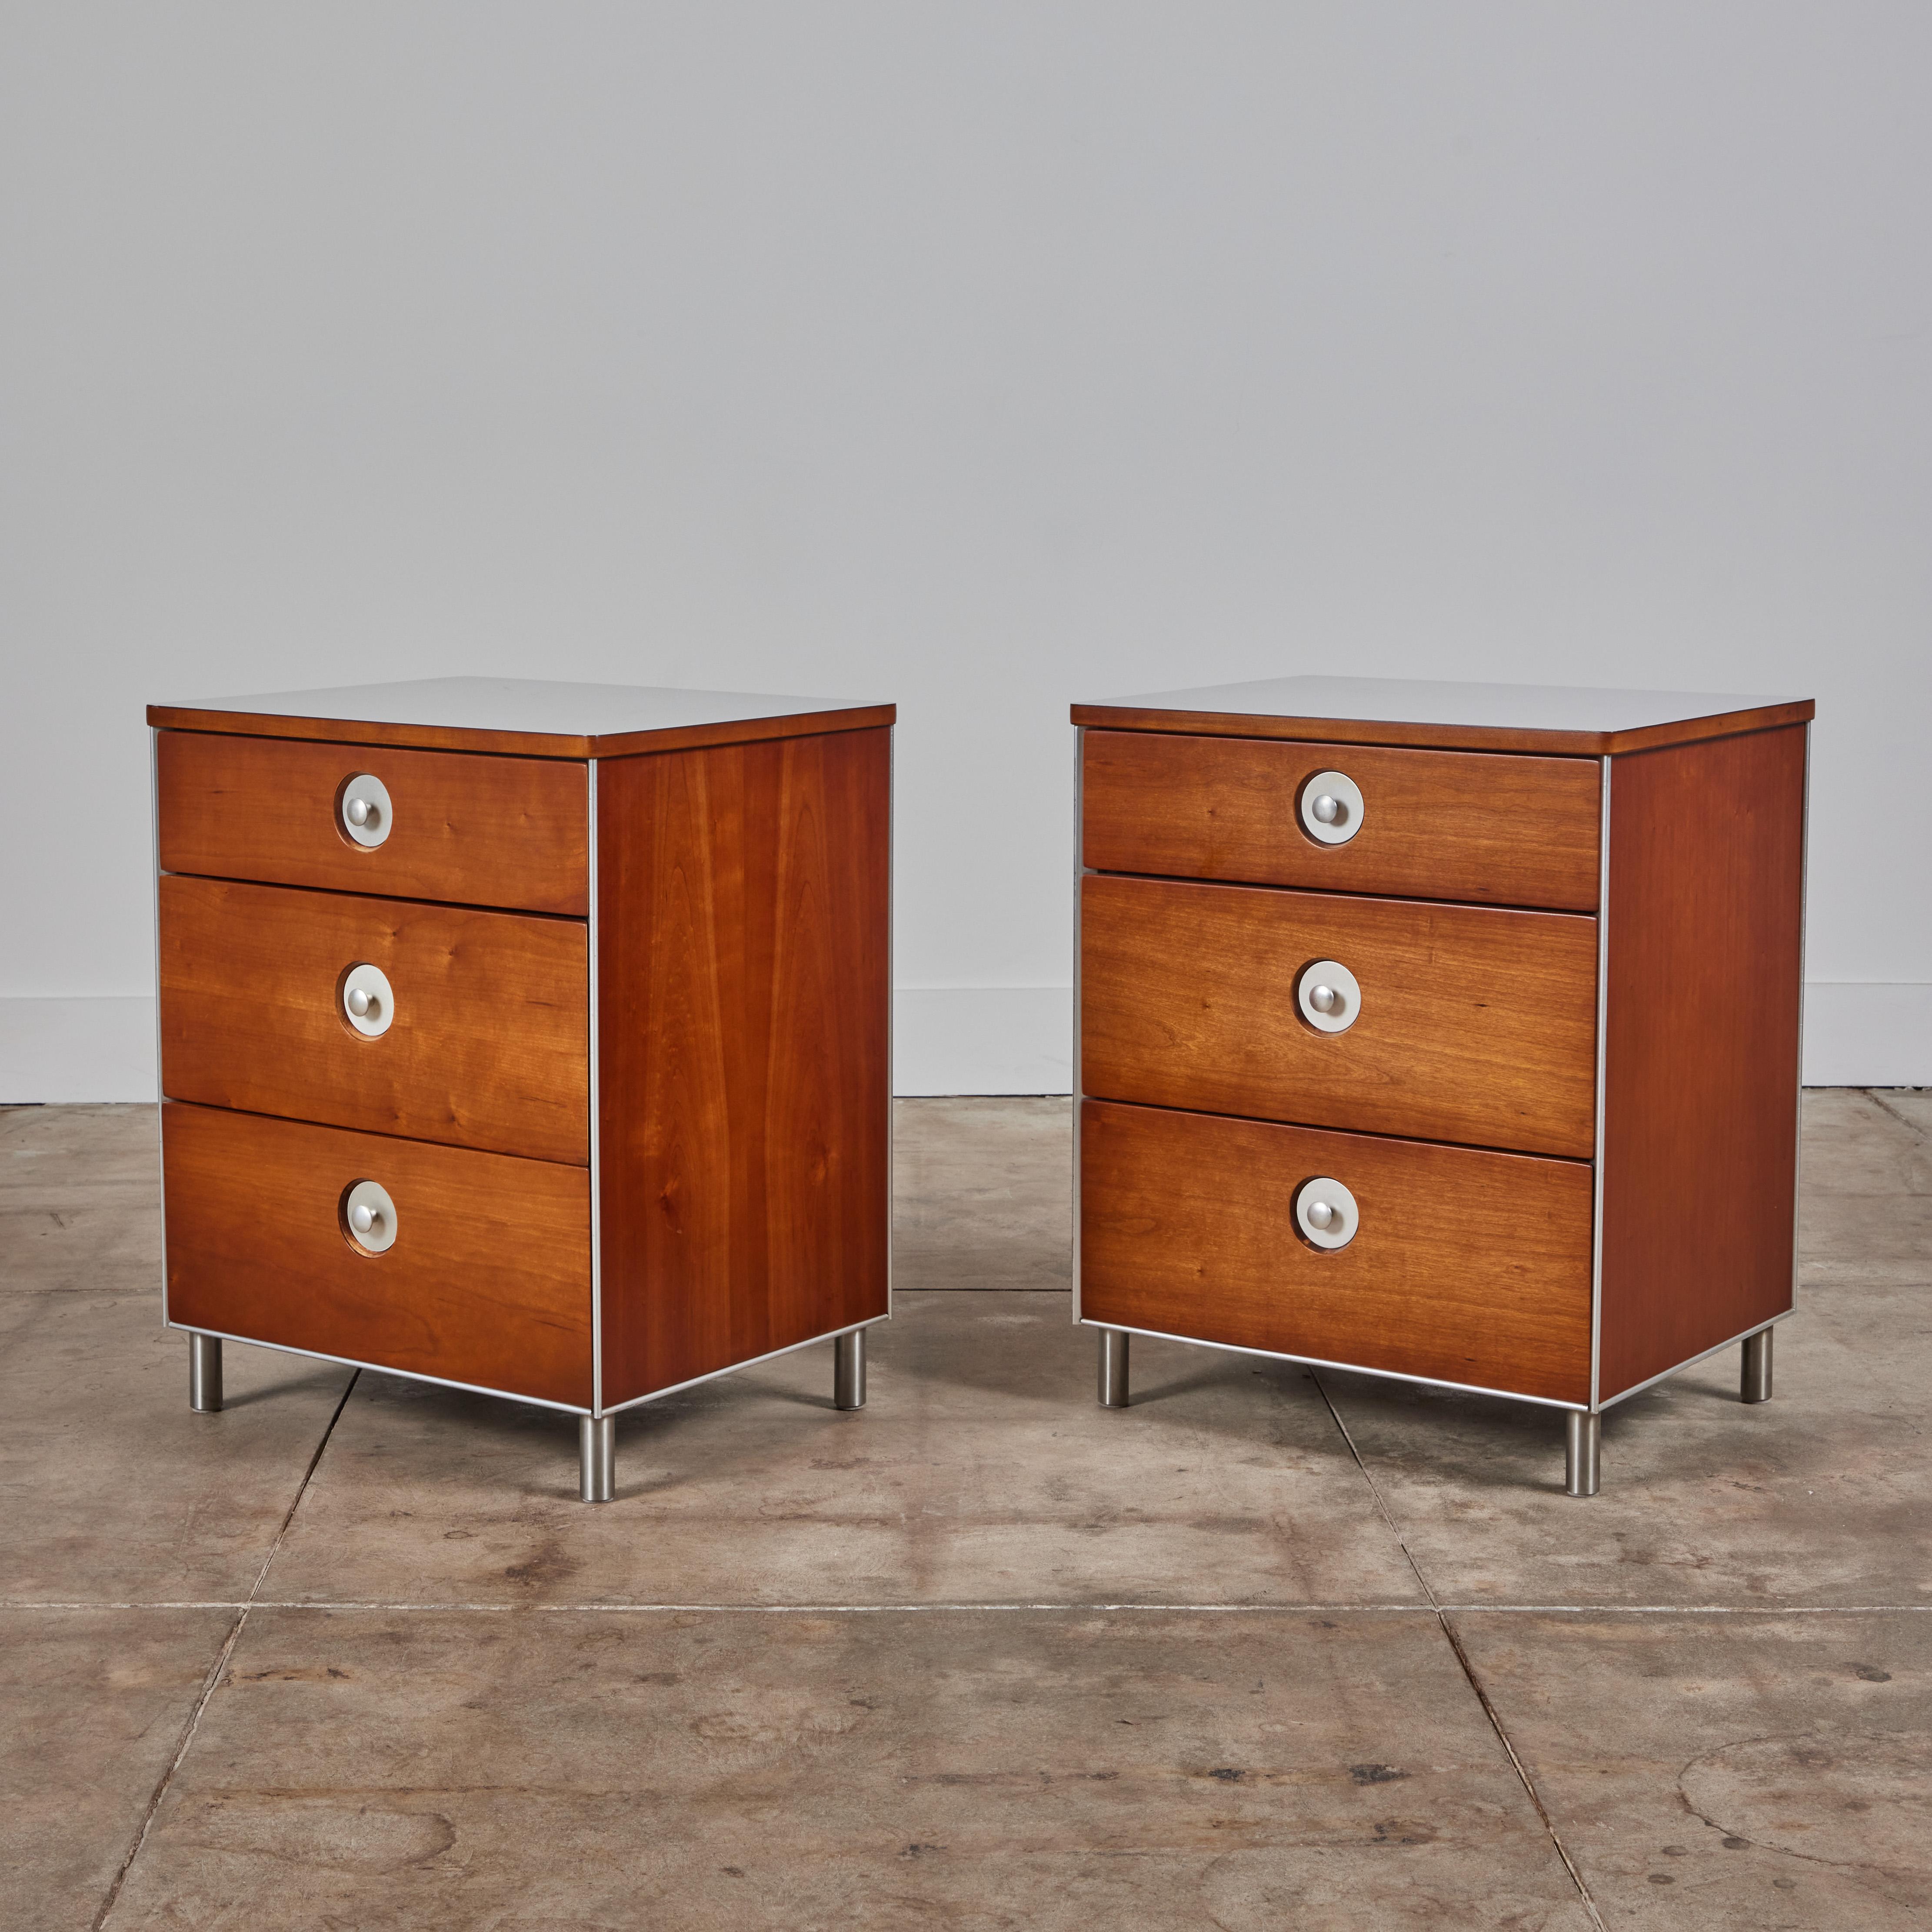 Pair of cherry nightstands by Raymond Loewy for Hill-Rom Company, c.1950s, USA. This industrial design features off white laminate tops that resemble a textured linen design. Each nightstand has three drawers with round aluminum drawer pulls. The